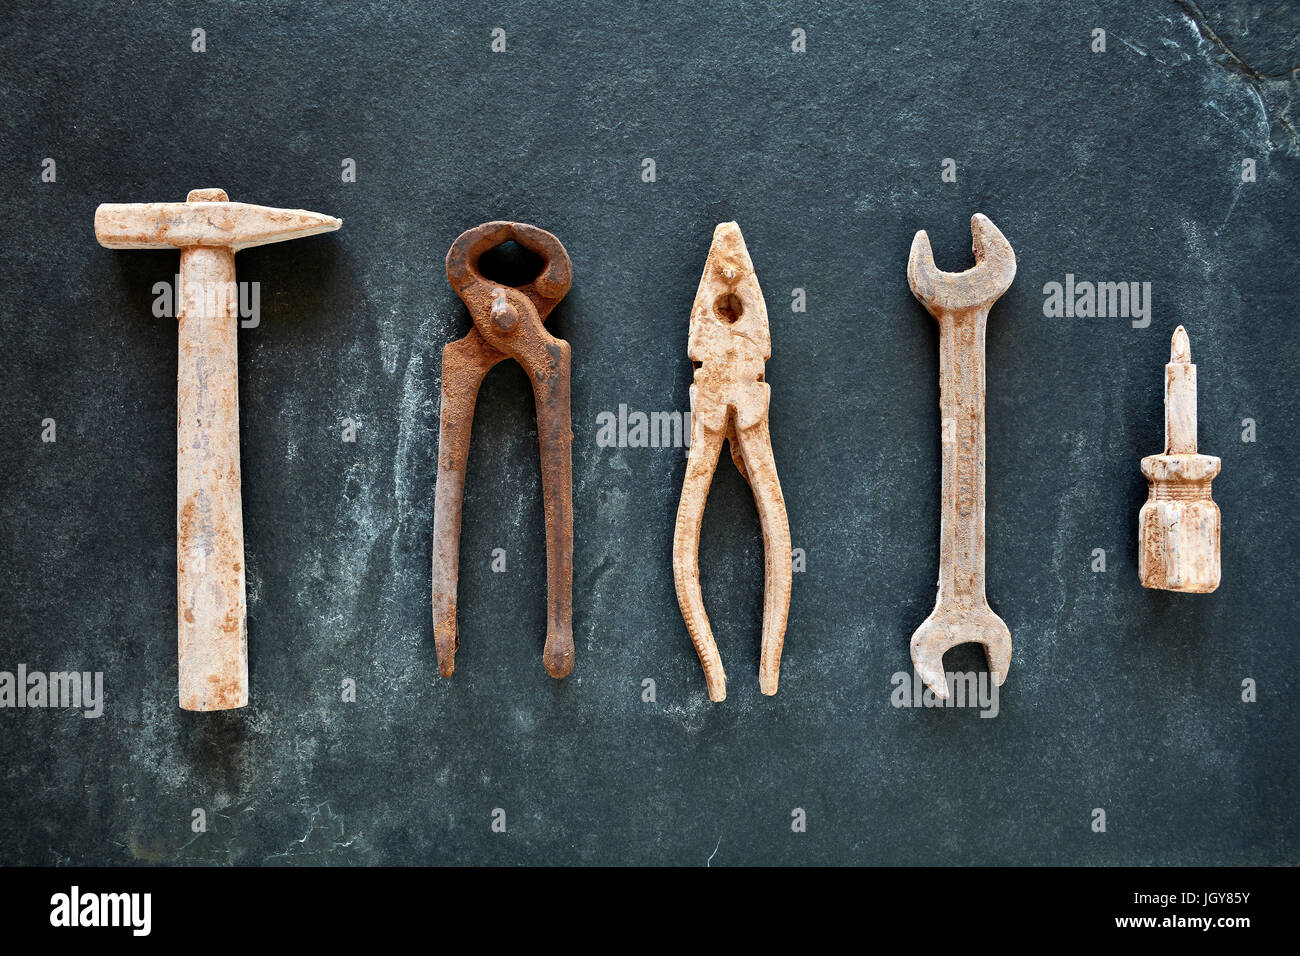 https://c8.alamy.com/comp/JGY85Y/rusty-like-tools-collection-made-of-chocolate-on-dark-slate-background-JGY85Y.jpg